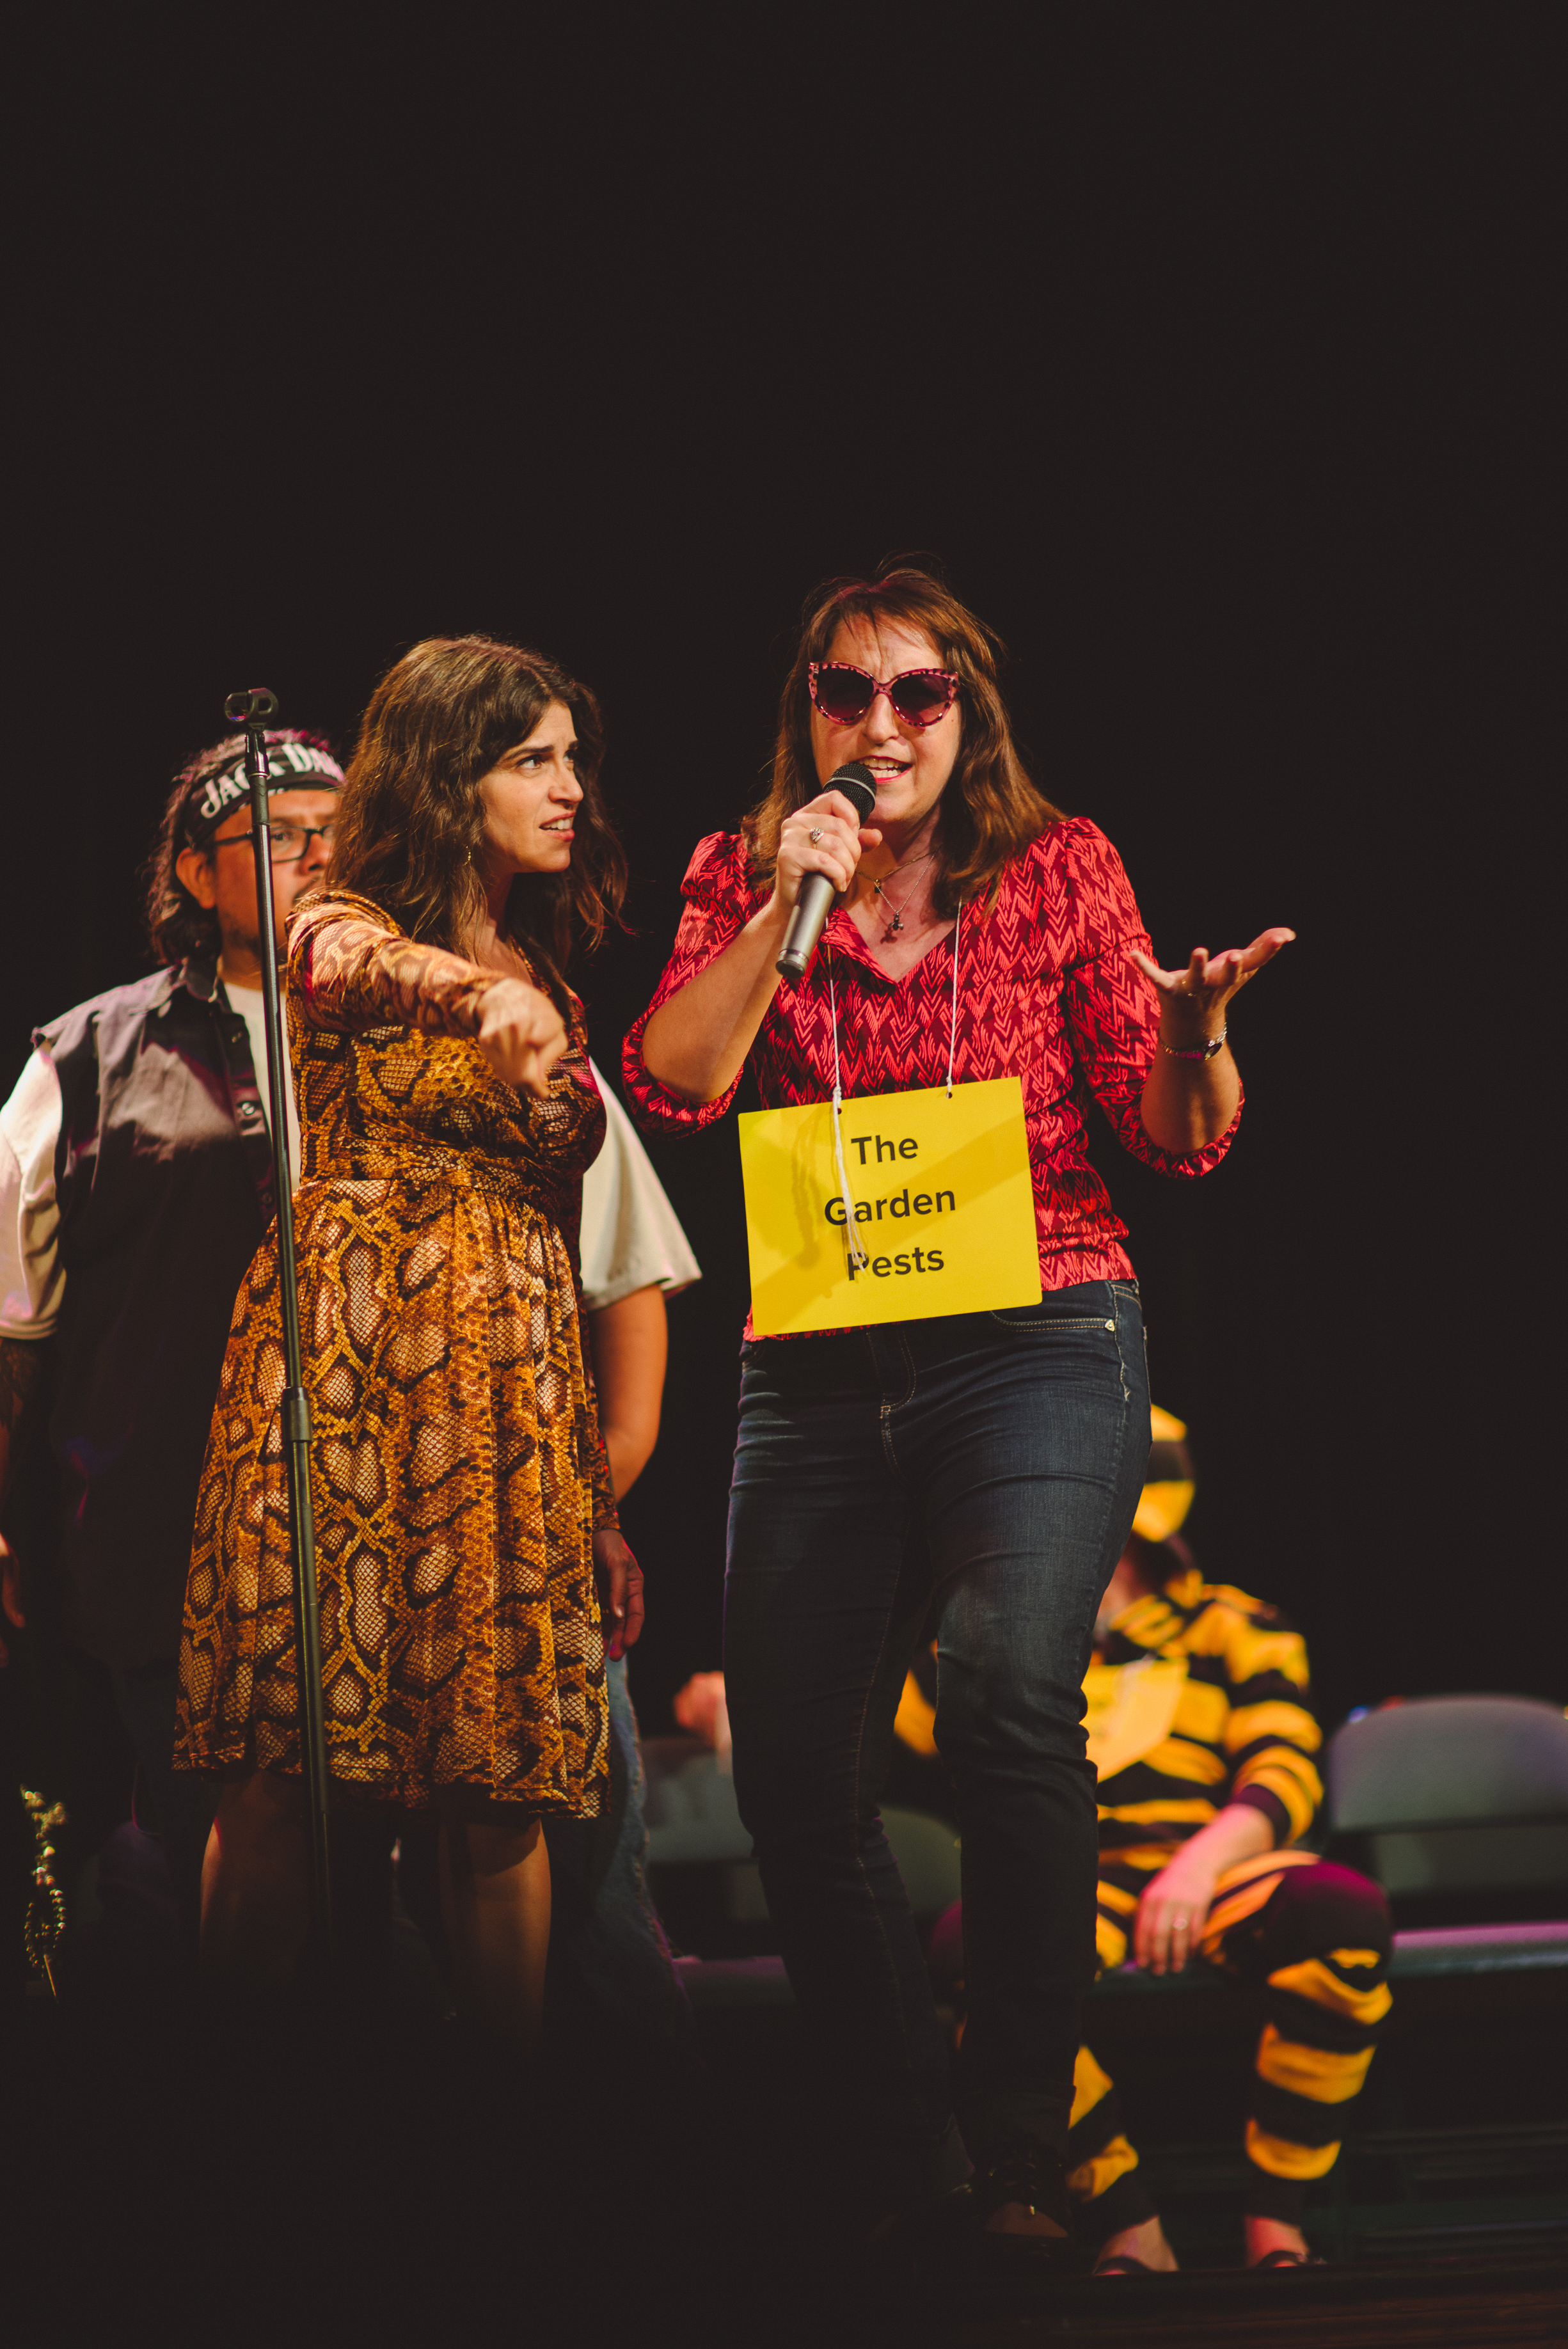 Rebecca Feldman and Speller at The Spelling Bee Company show